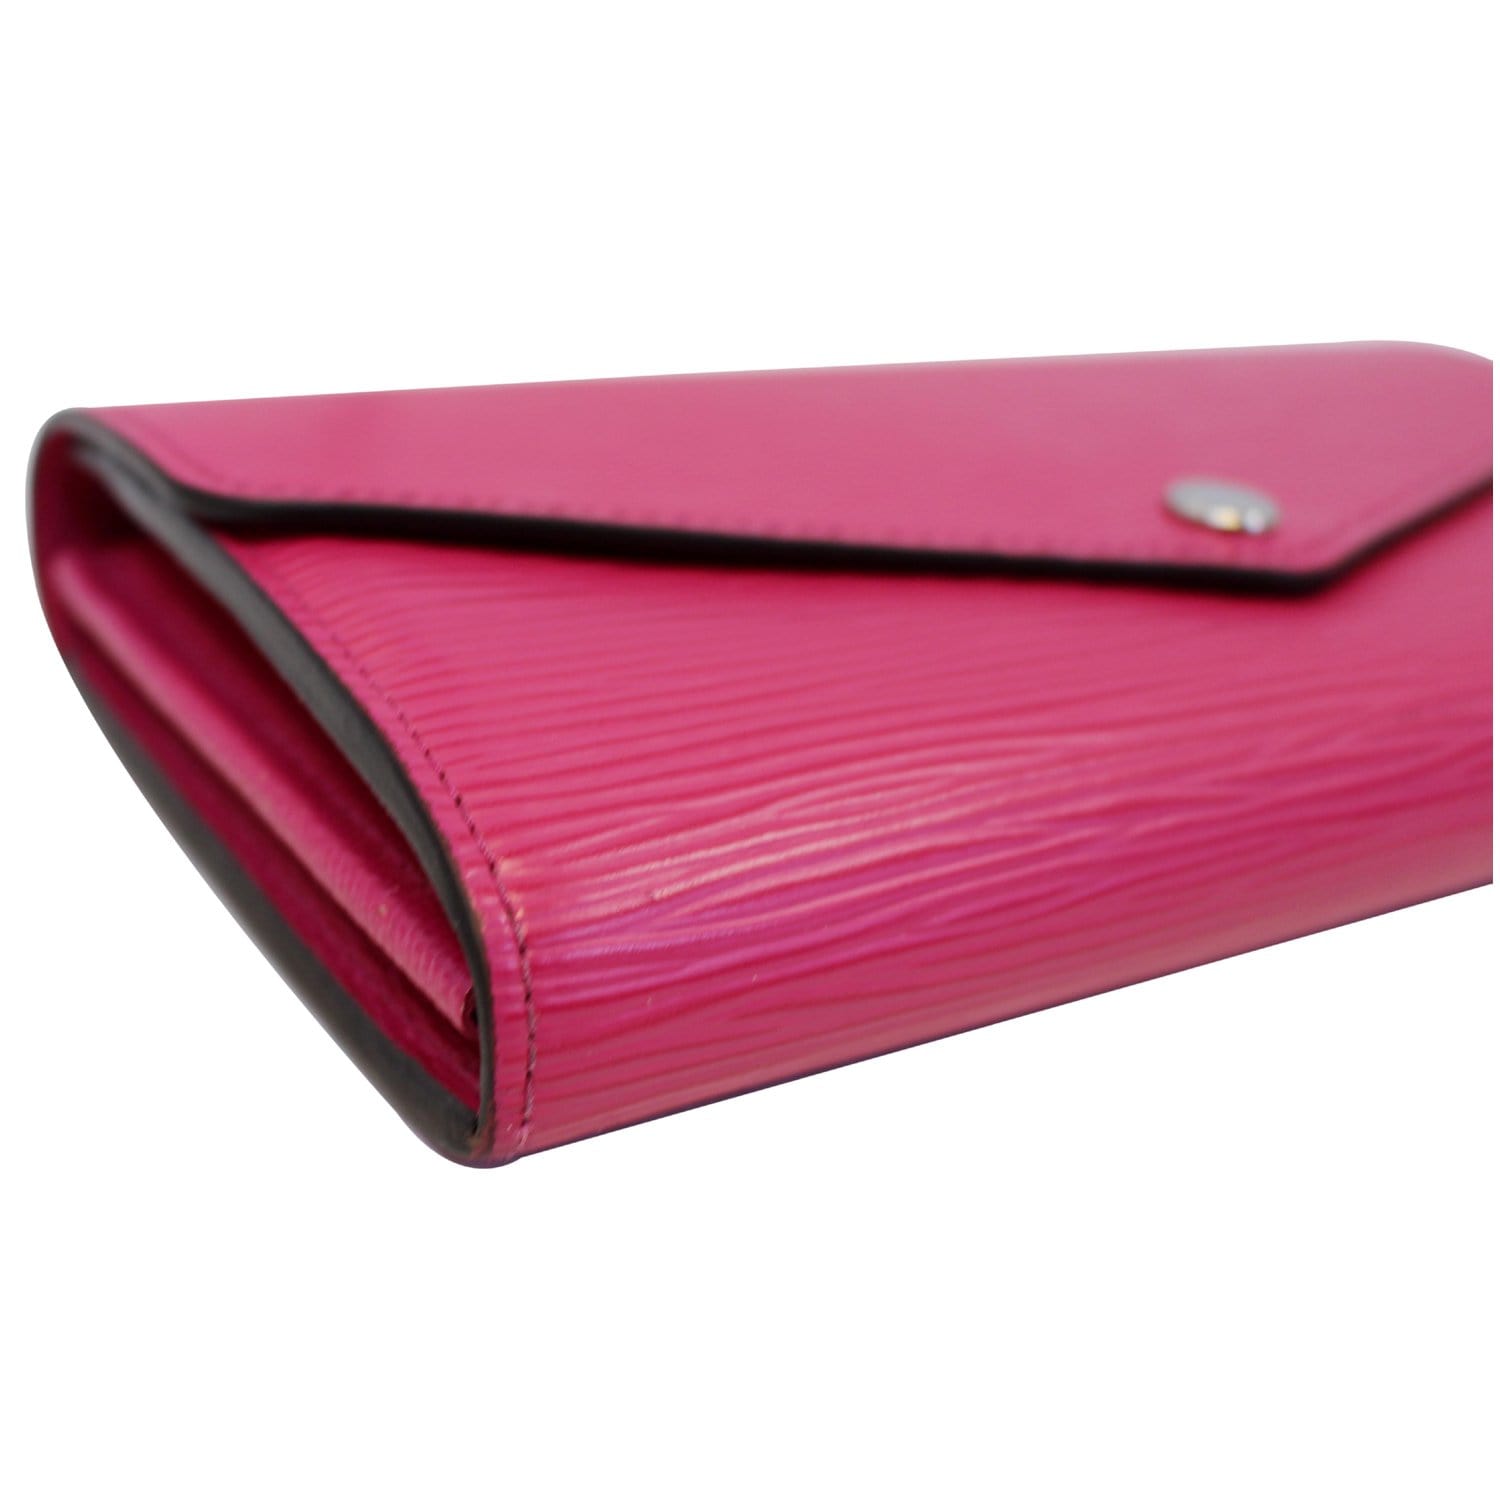 Sarah patent leather wallet Louis Vuitton Pink in Patent leather - 31174867